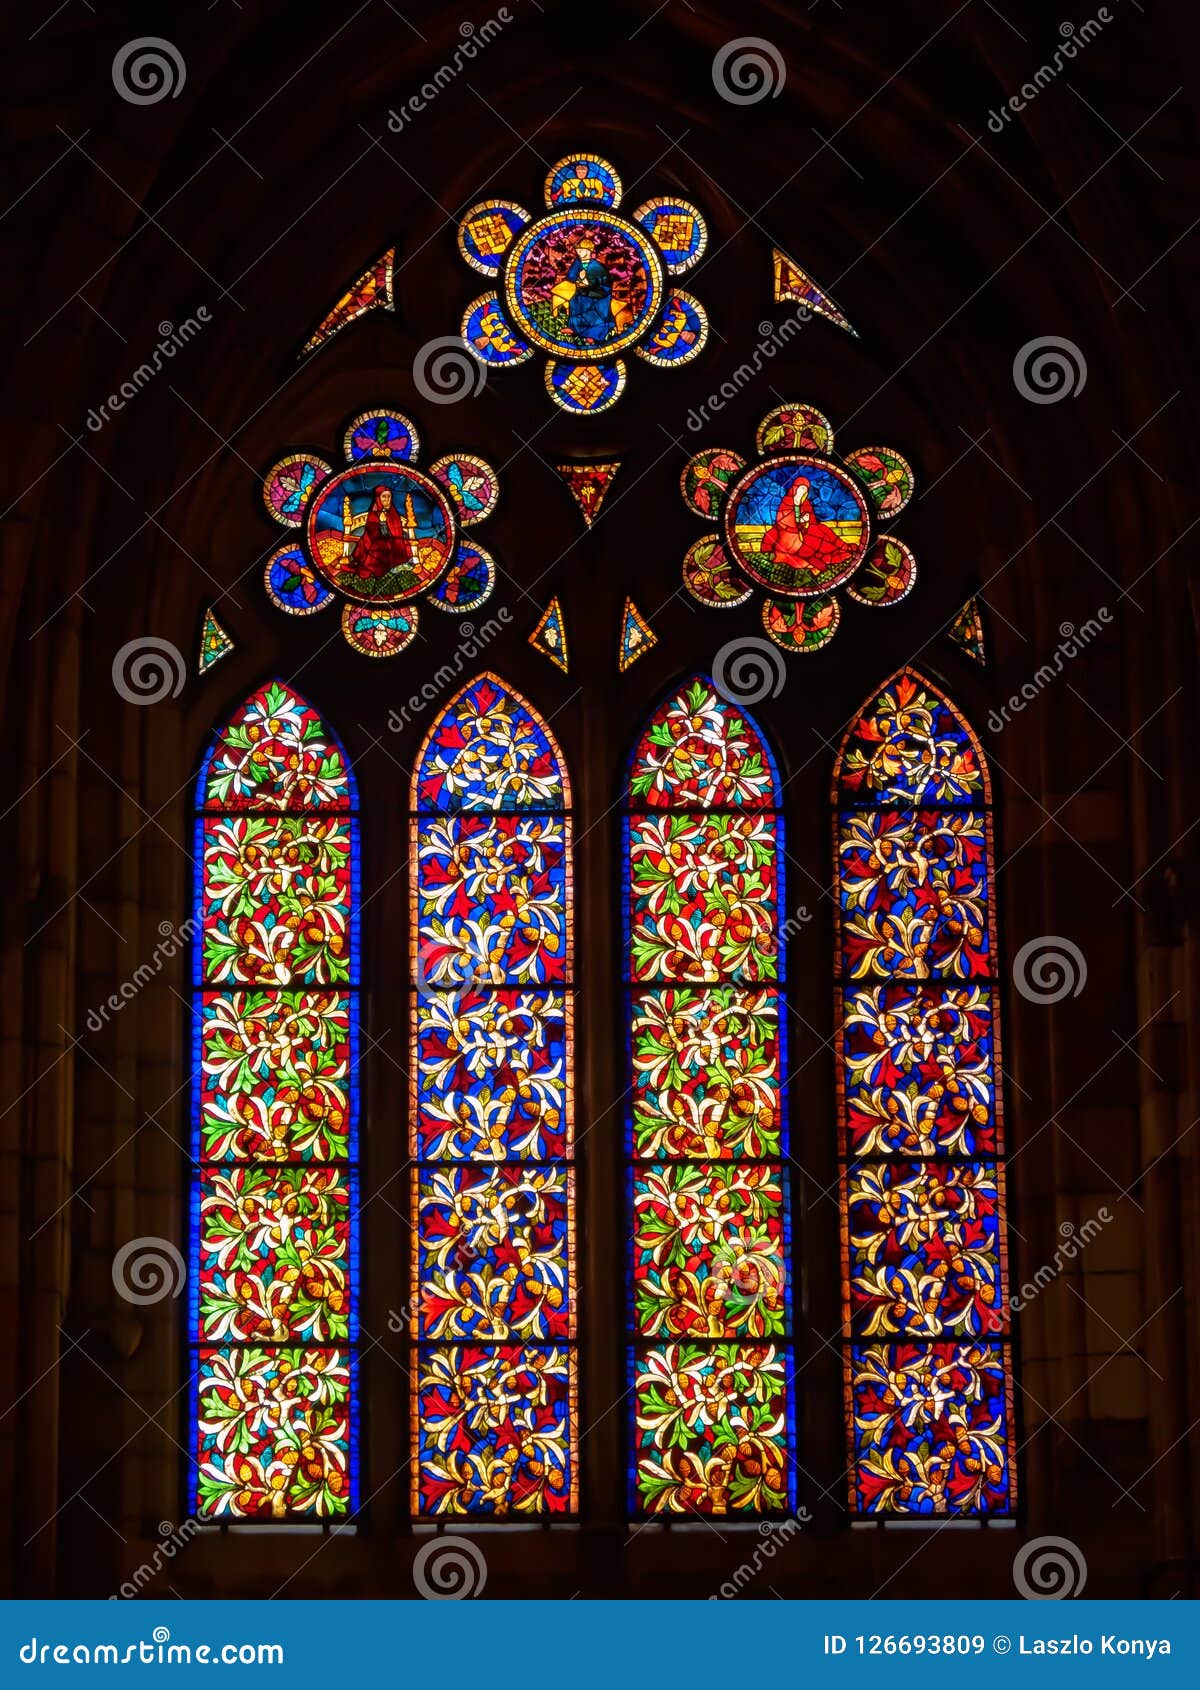 stained glass church window - leon